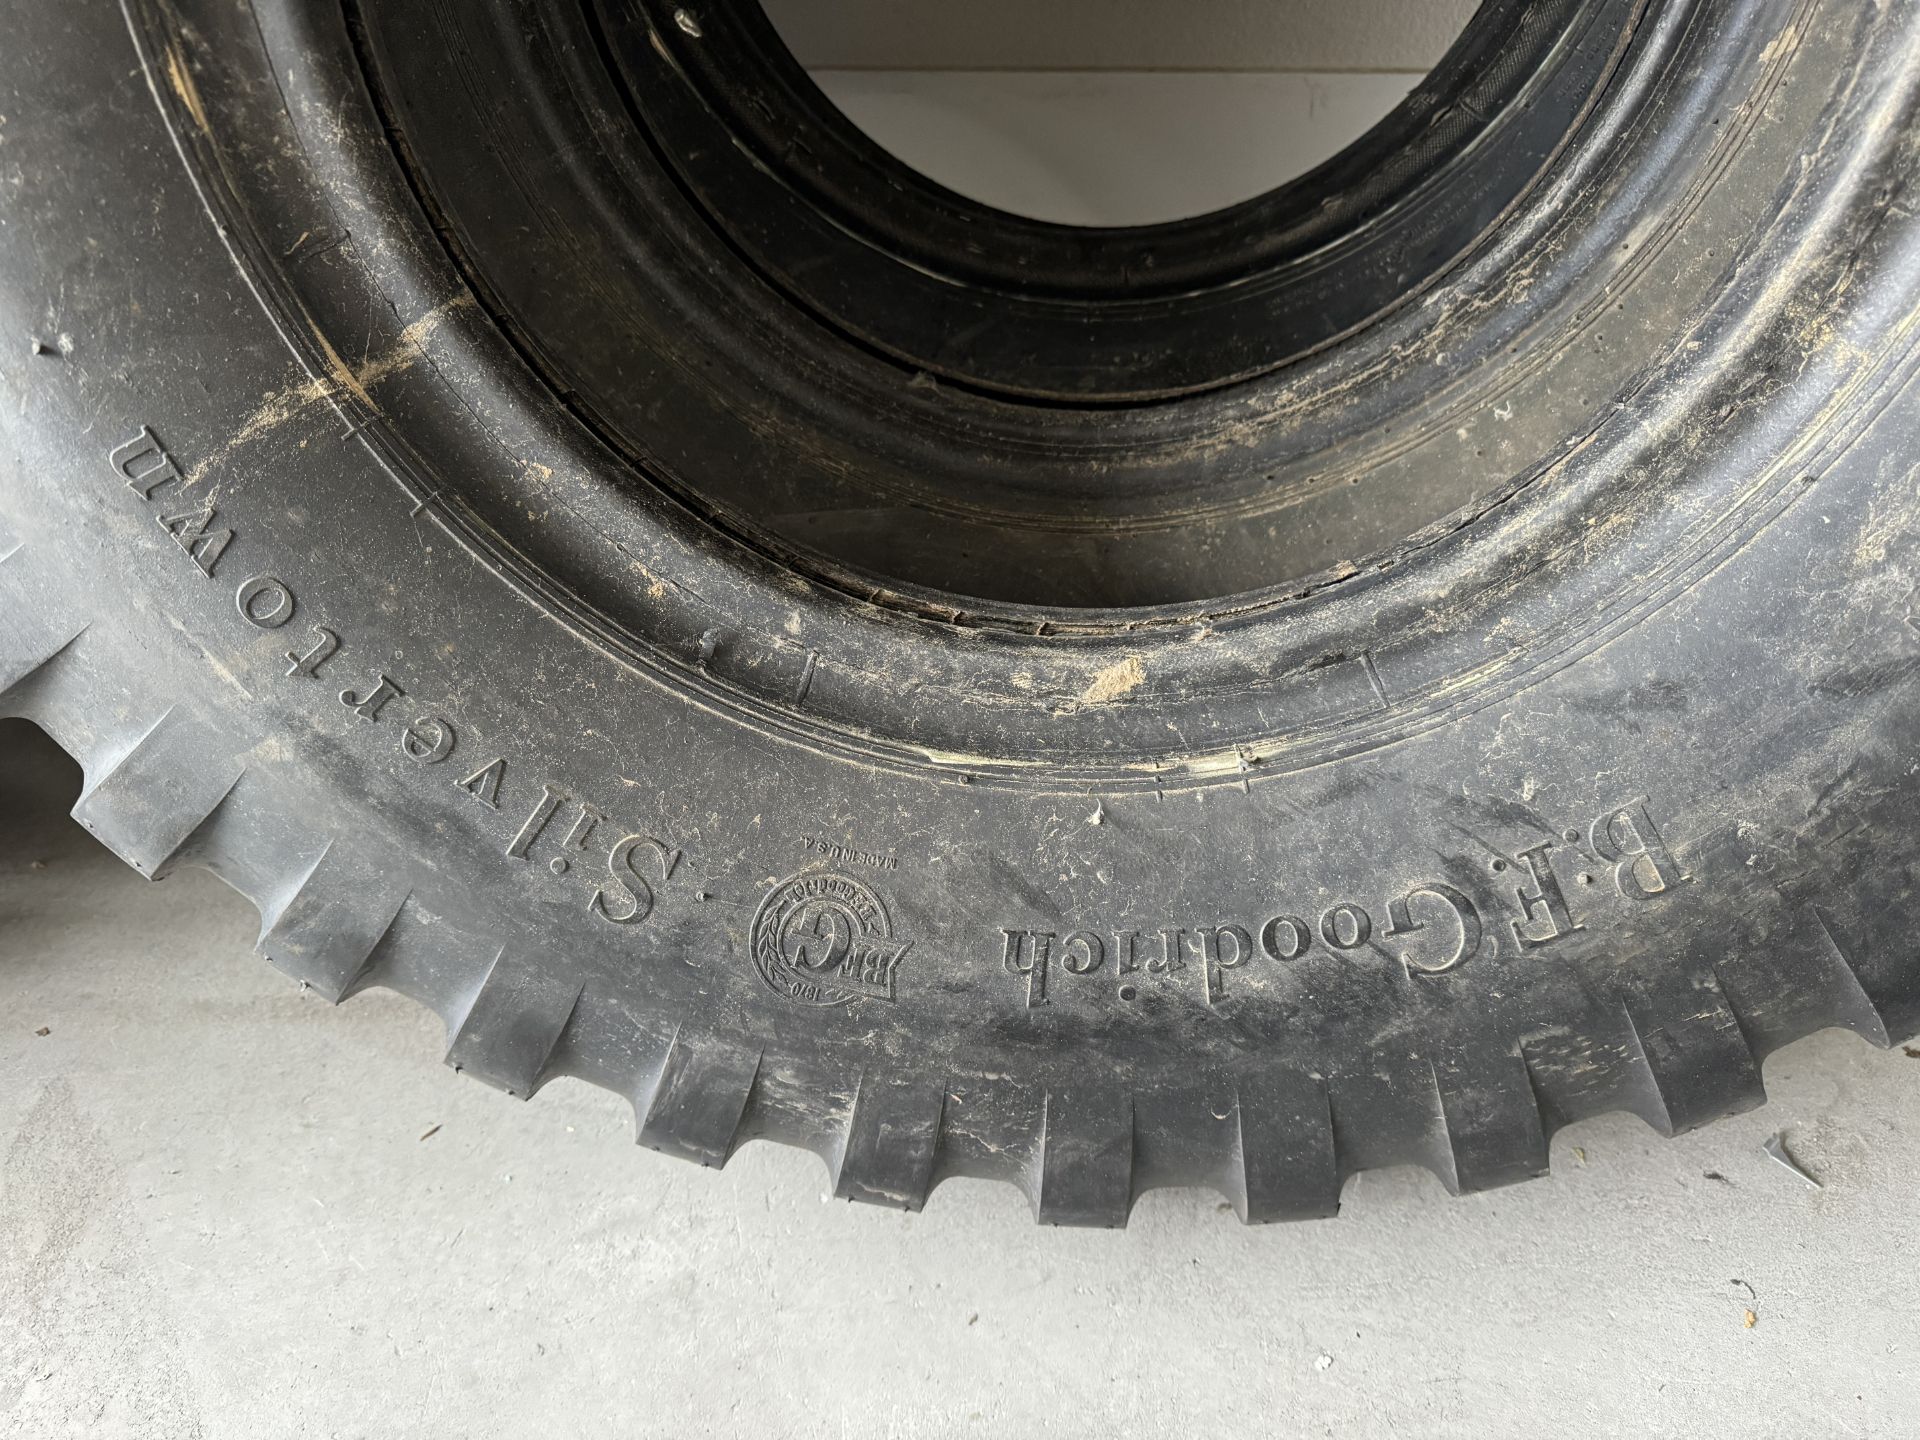 PNEUMATIC MILITARY TIRES - Image 2 of 6